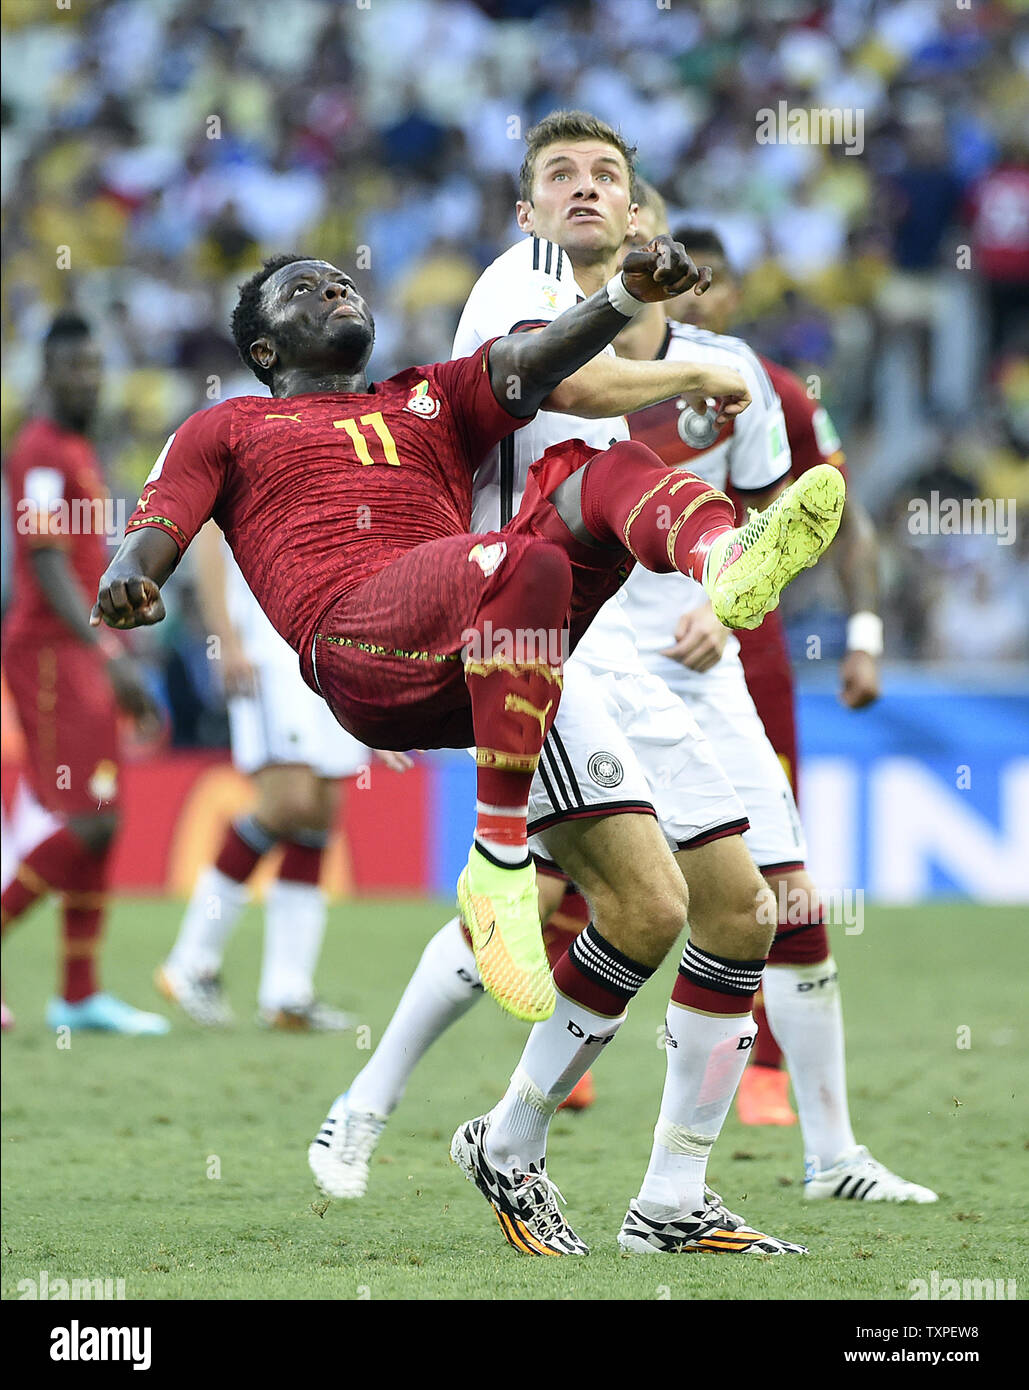 Thomas Muller of Germany competes with Sulley Muntari (L) of Ghana during the 2014 FIFA World Cup Group G match at the Estadio Castelao in Fortaleza, Brazil on June 21, 2014. UPI/Chris Brunskill Stock Photo